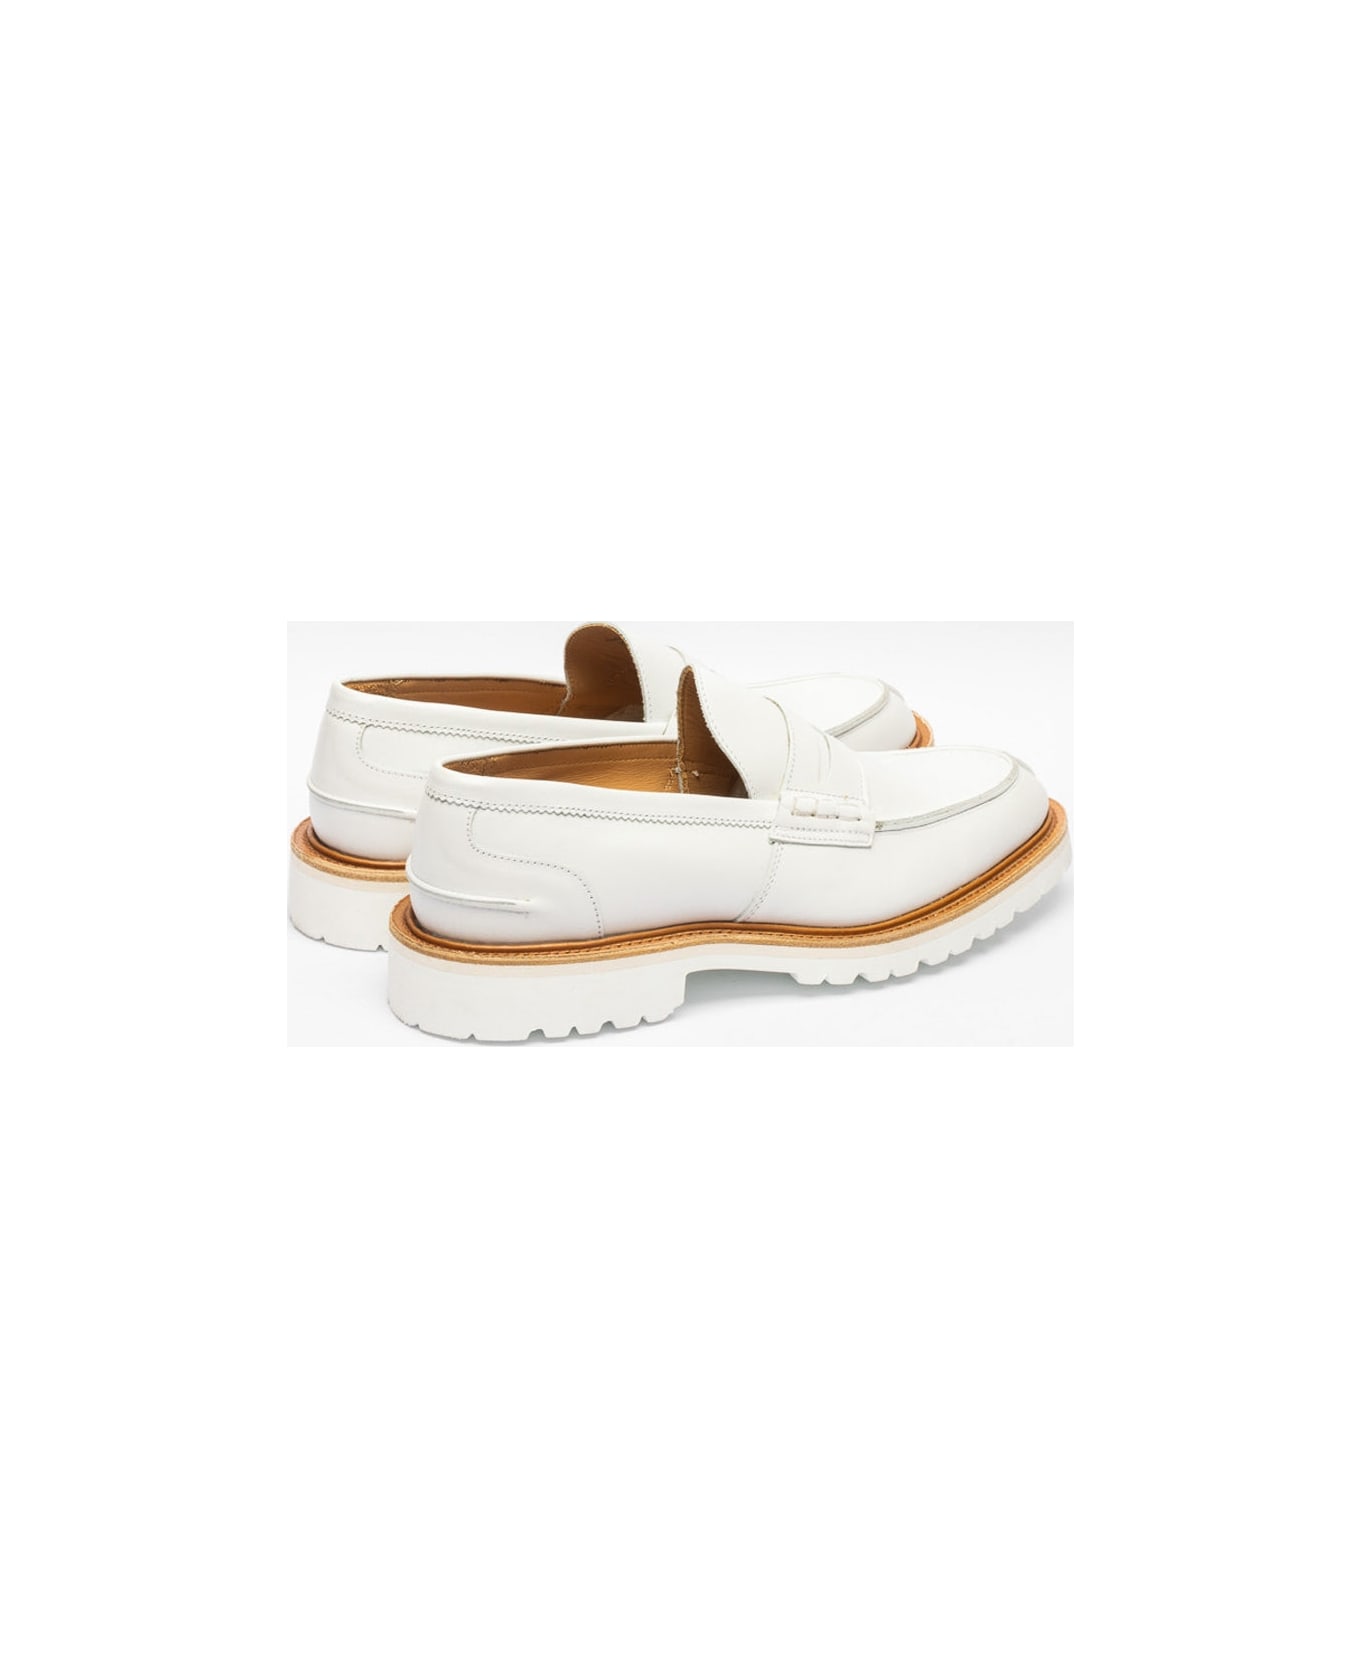 Tricker's White Calf Penny Loafer - Bianco